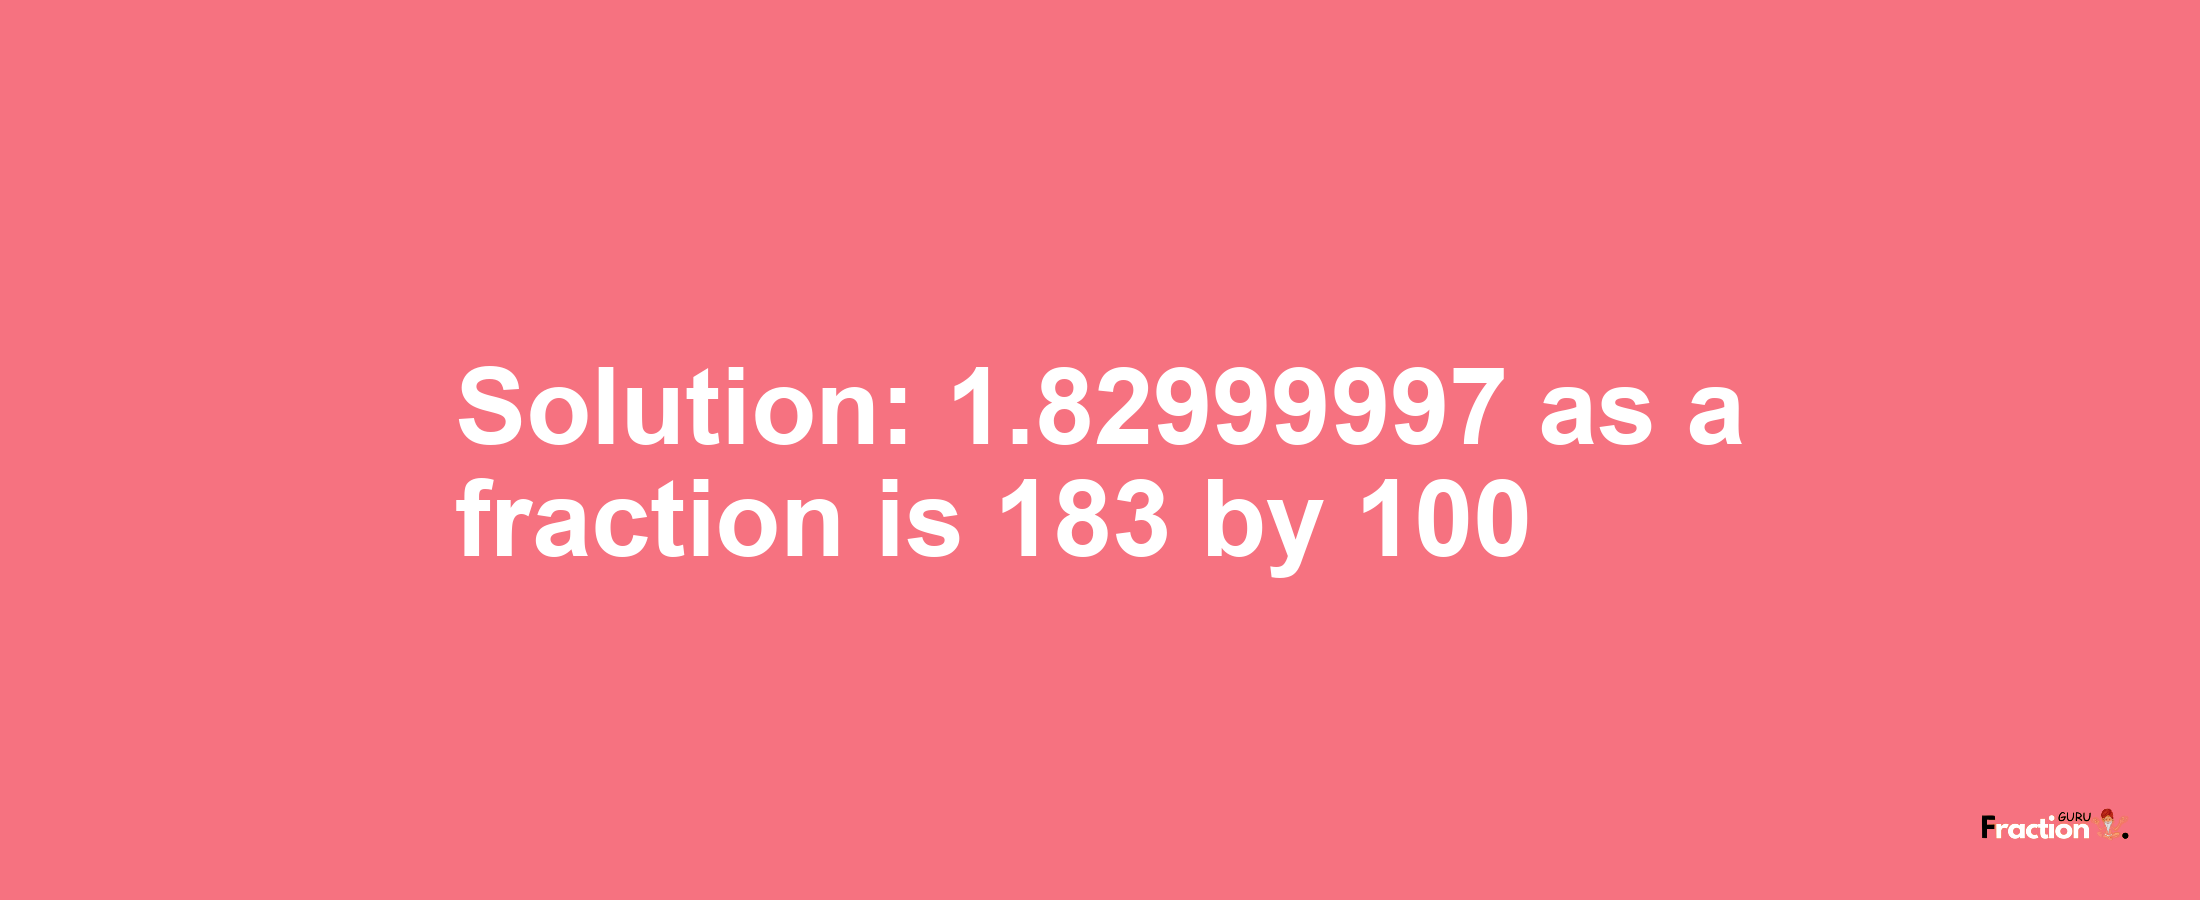 Solution:1.82999997 as a fraction is 183/100